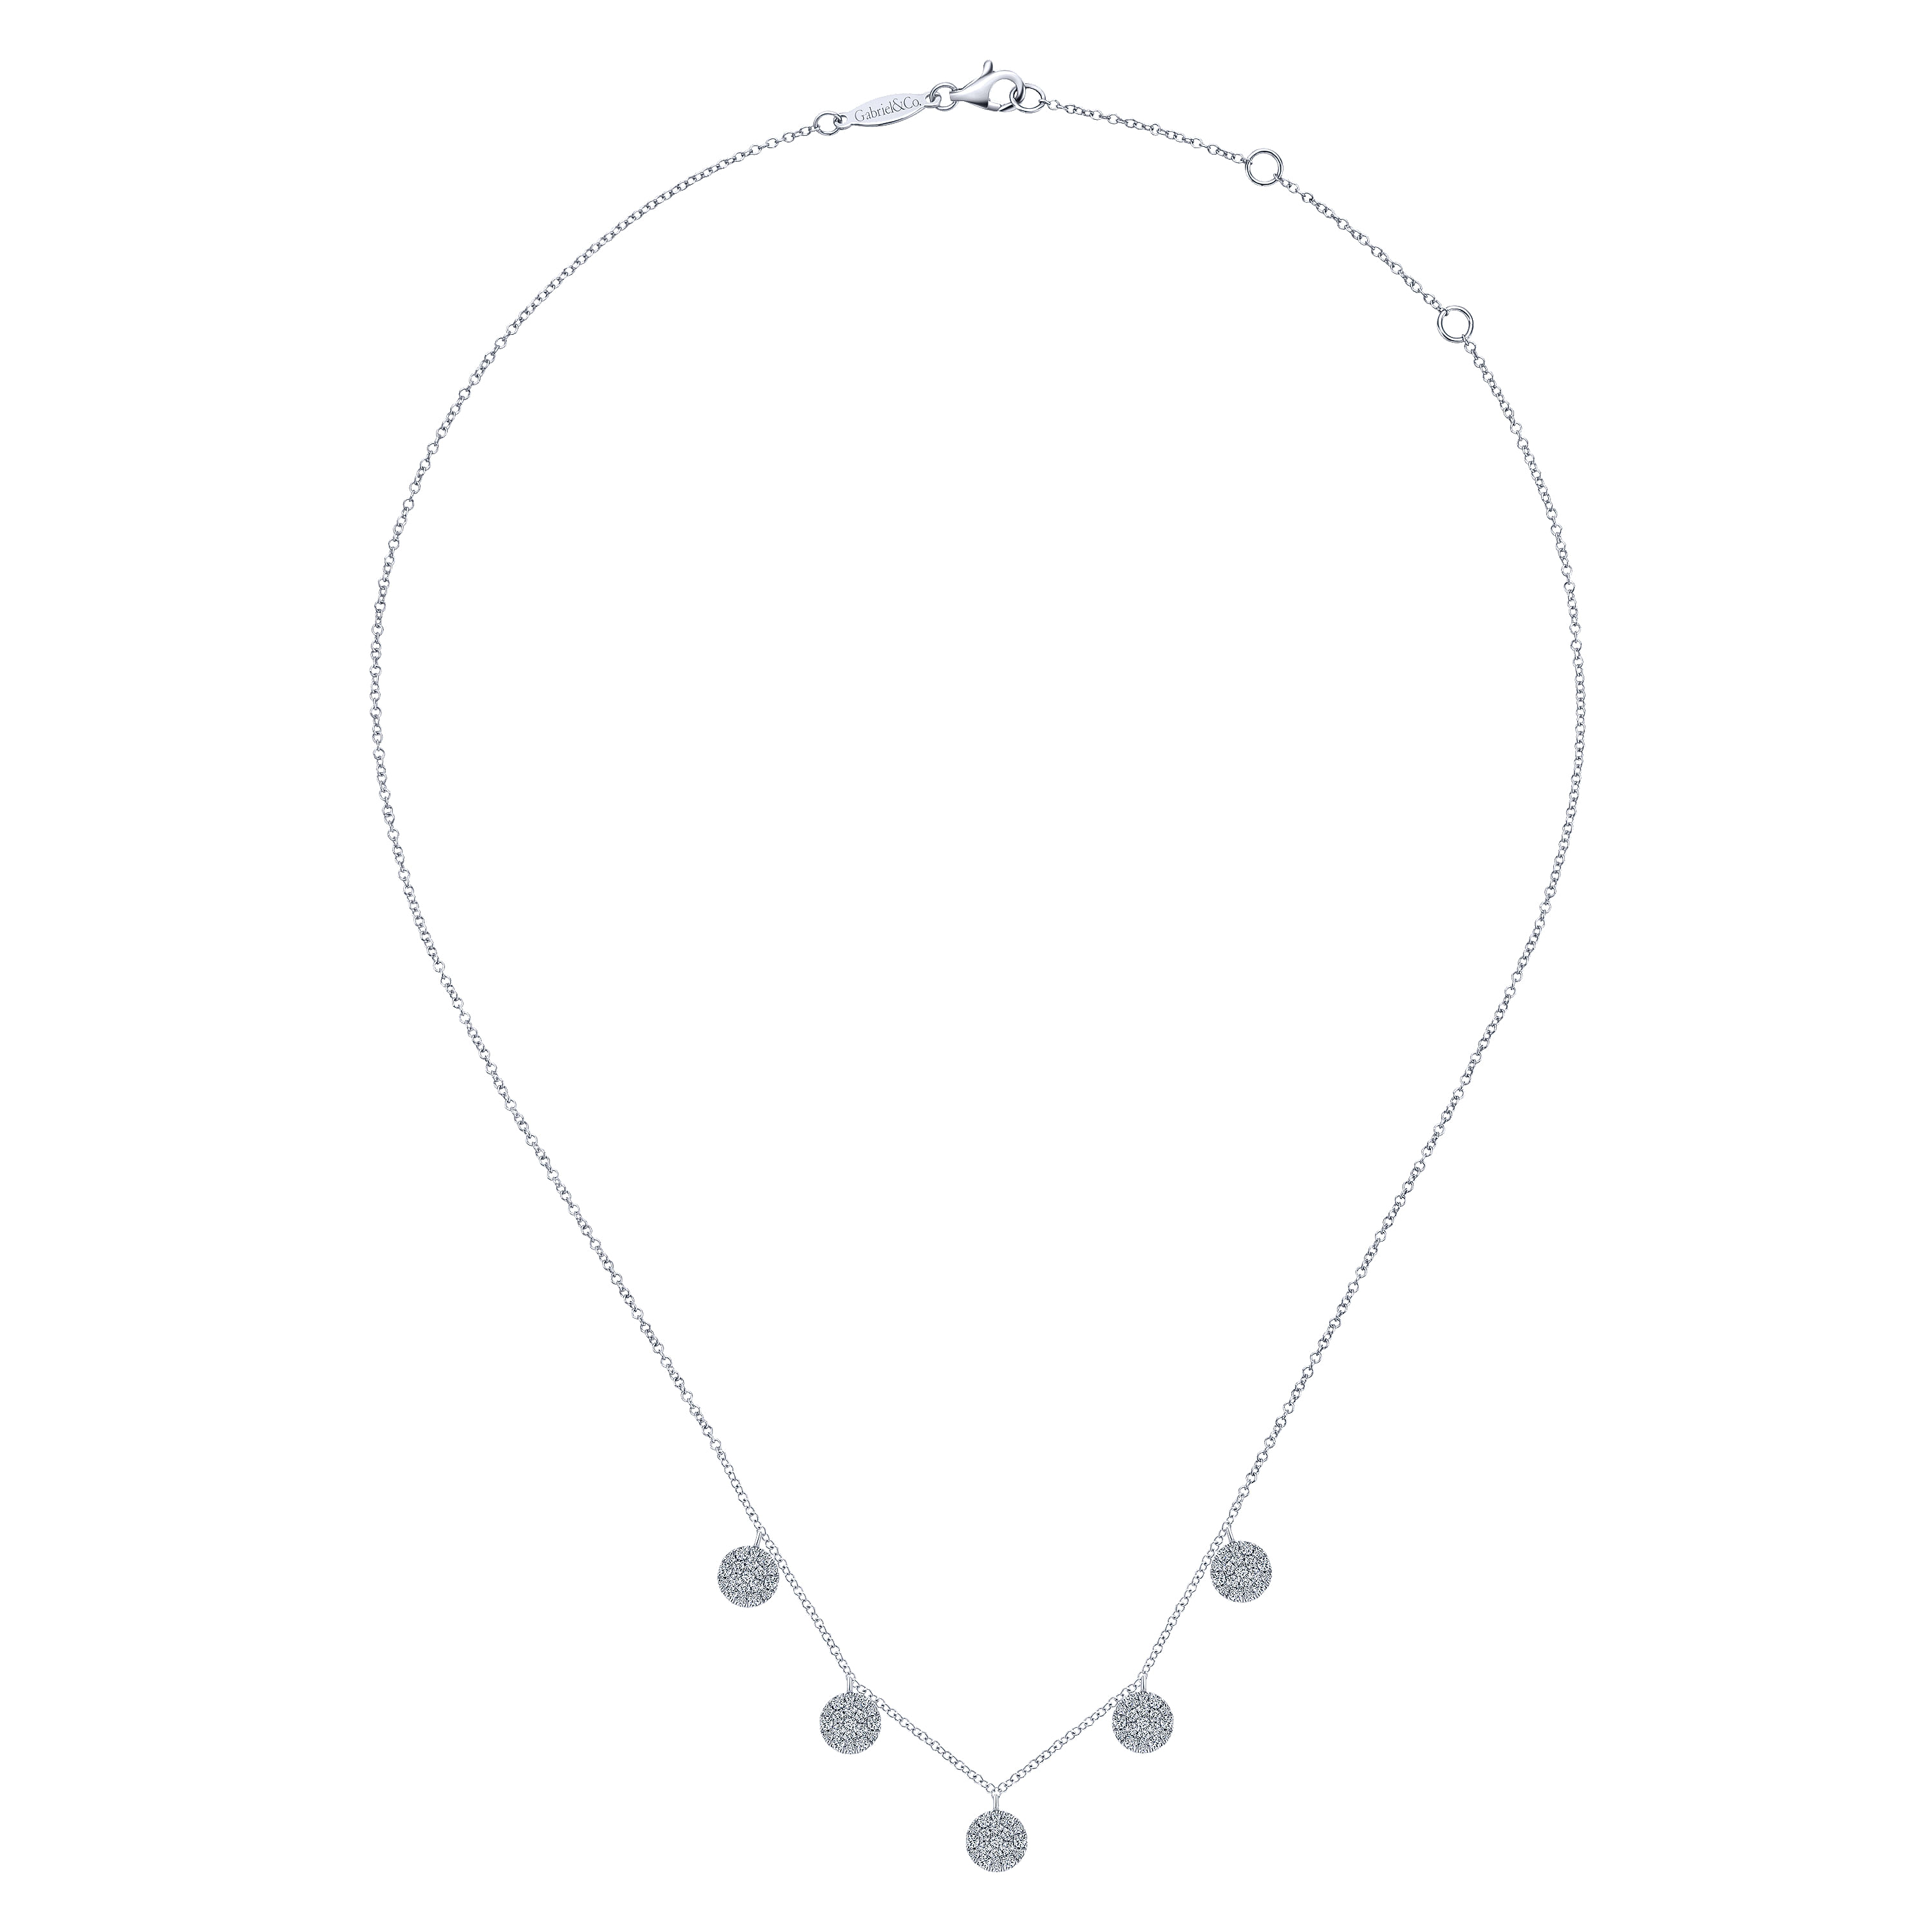 14K White Gold Necklace with Round Diamond Pavé Disc Drops